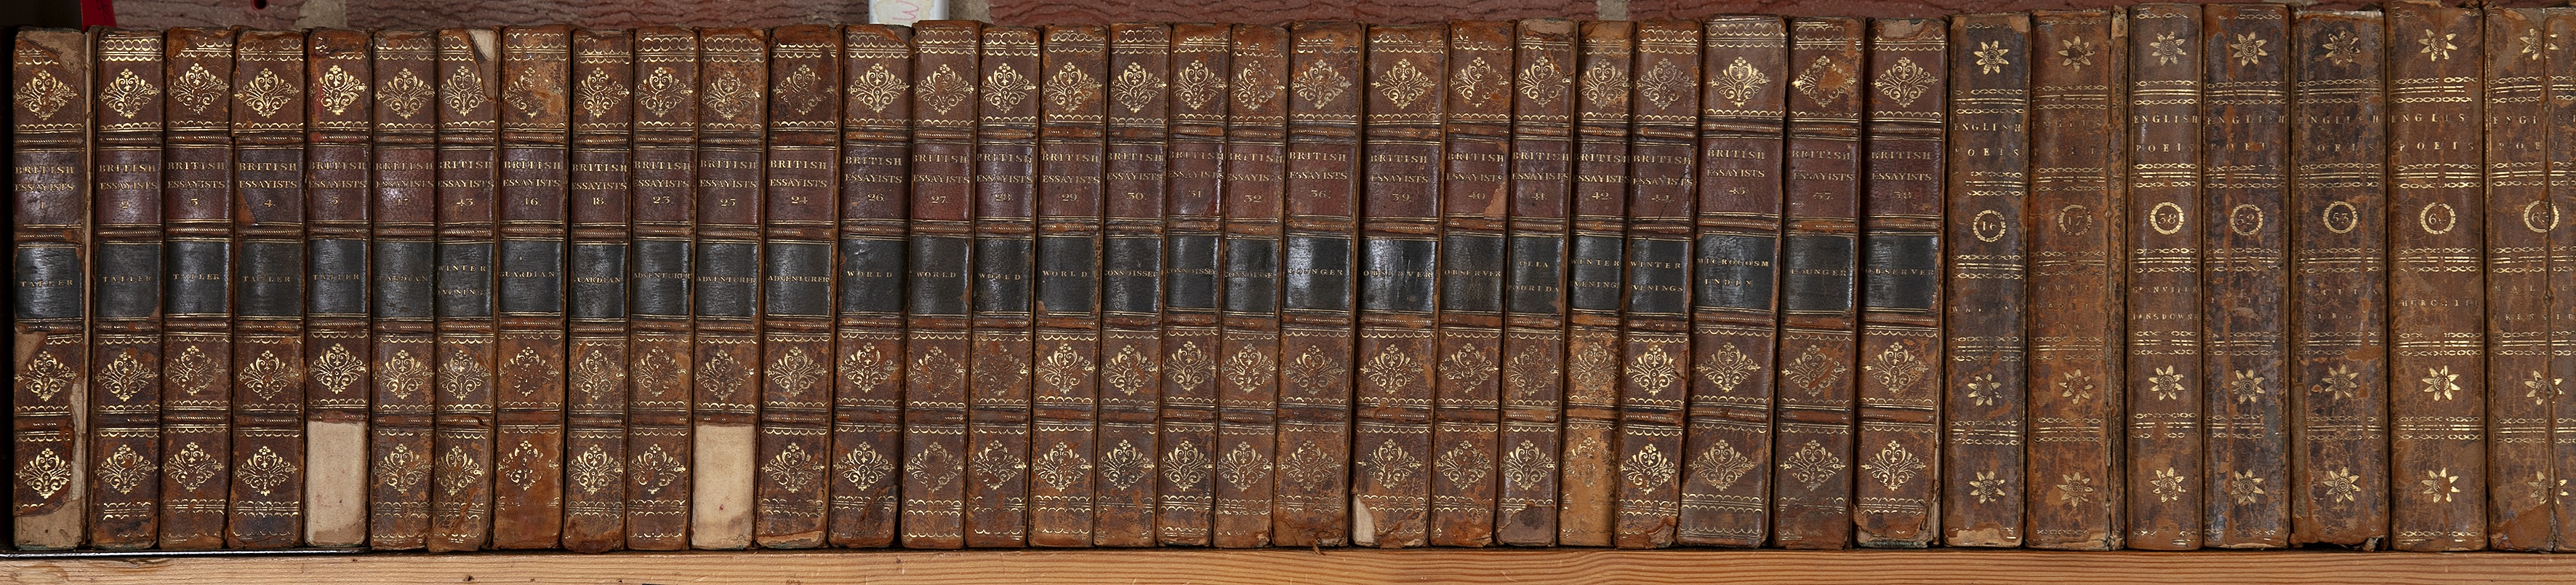 Johnson (Samuel). The Works of the English Poets. 63 vols. Small 8vo, full calf. Buckland et all, - Image 3 of 5